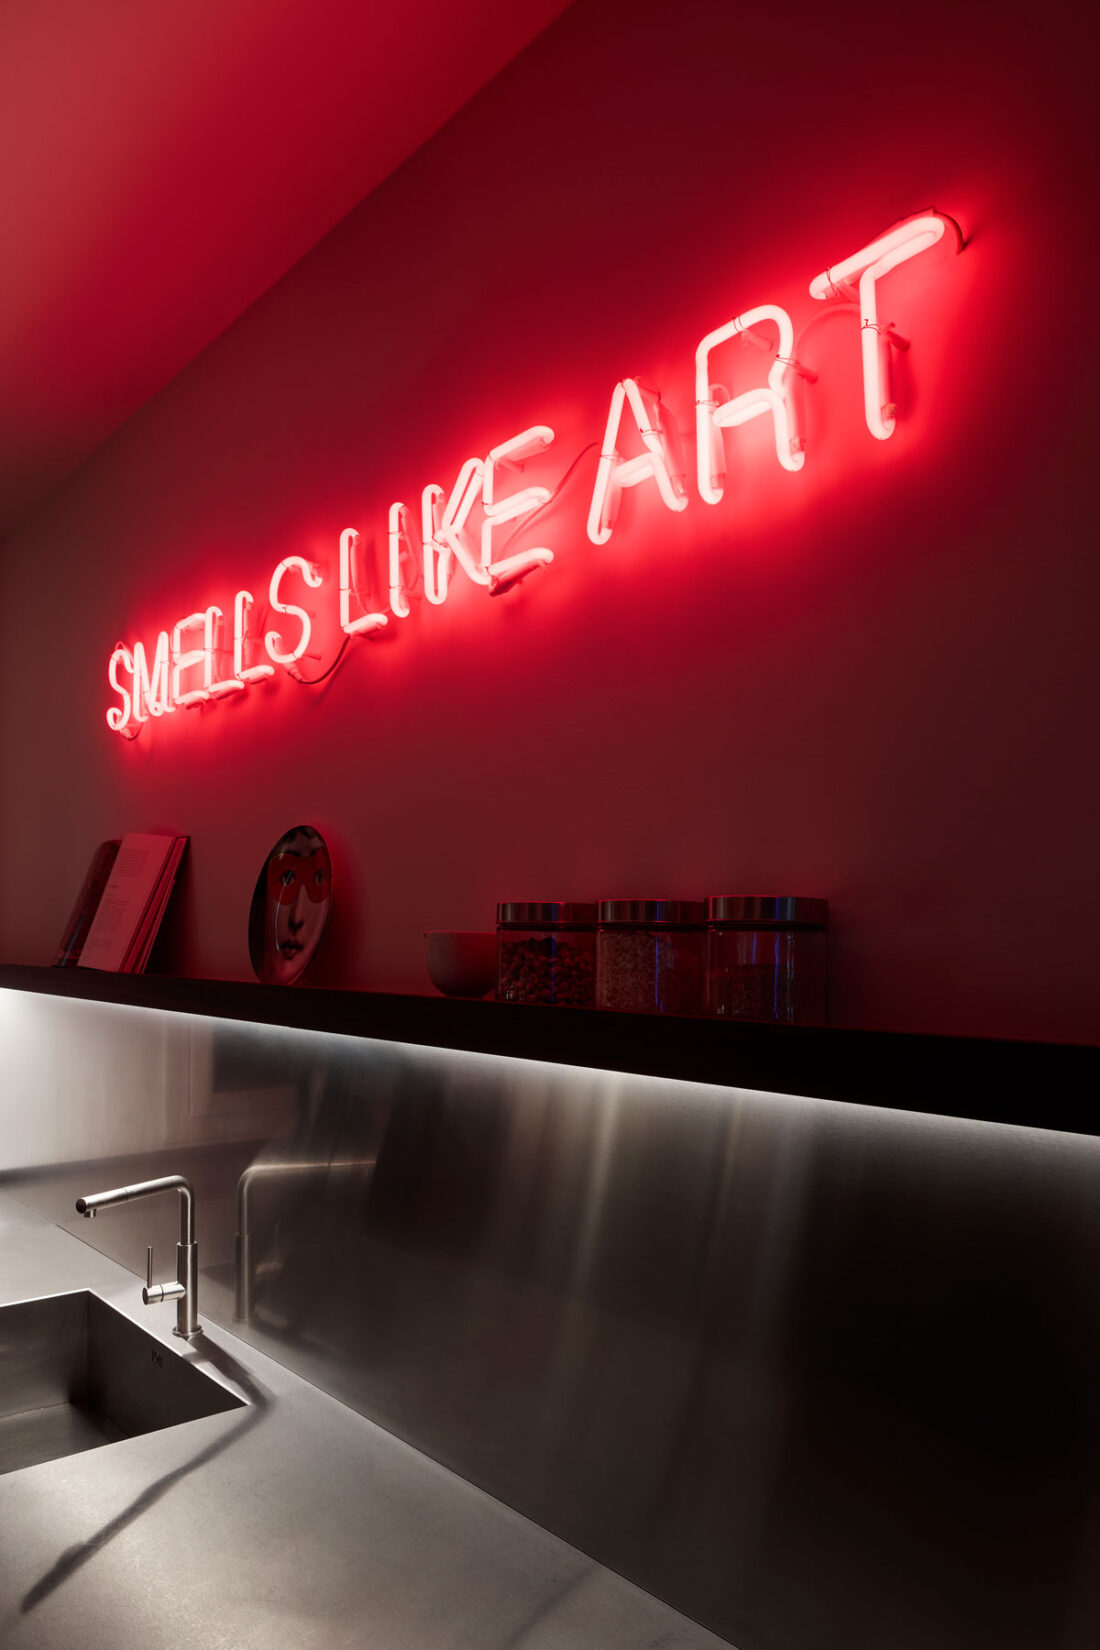 artistic red neon over a stainless steel kitchen top with accessories